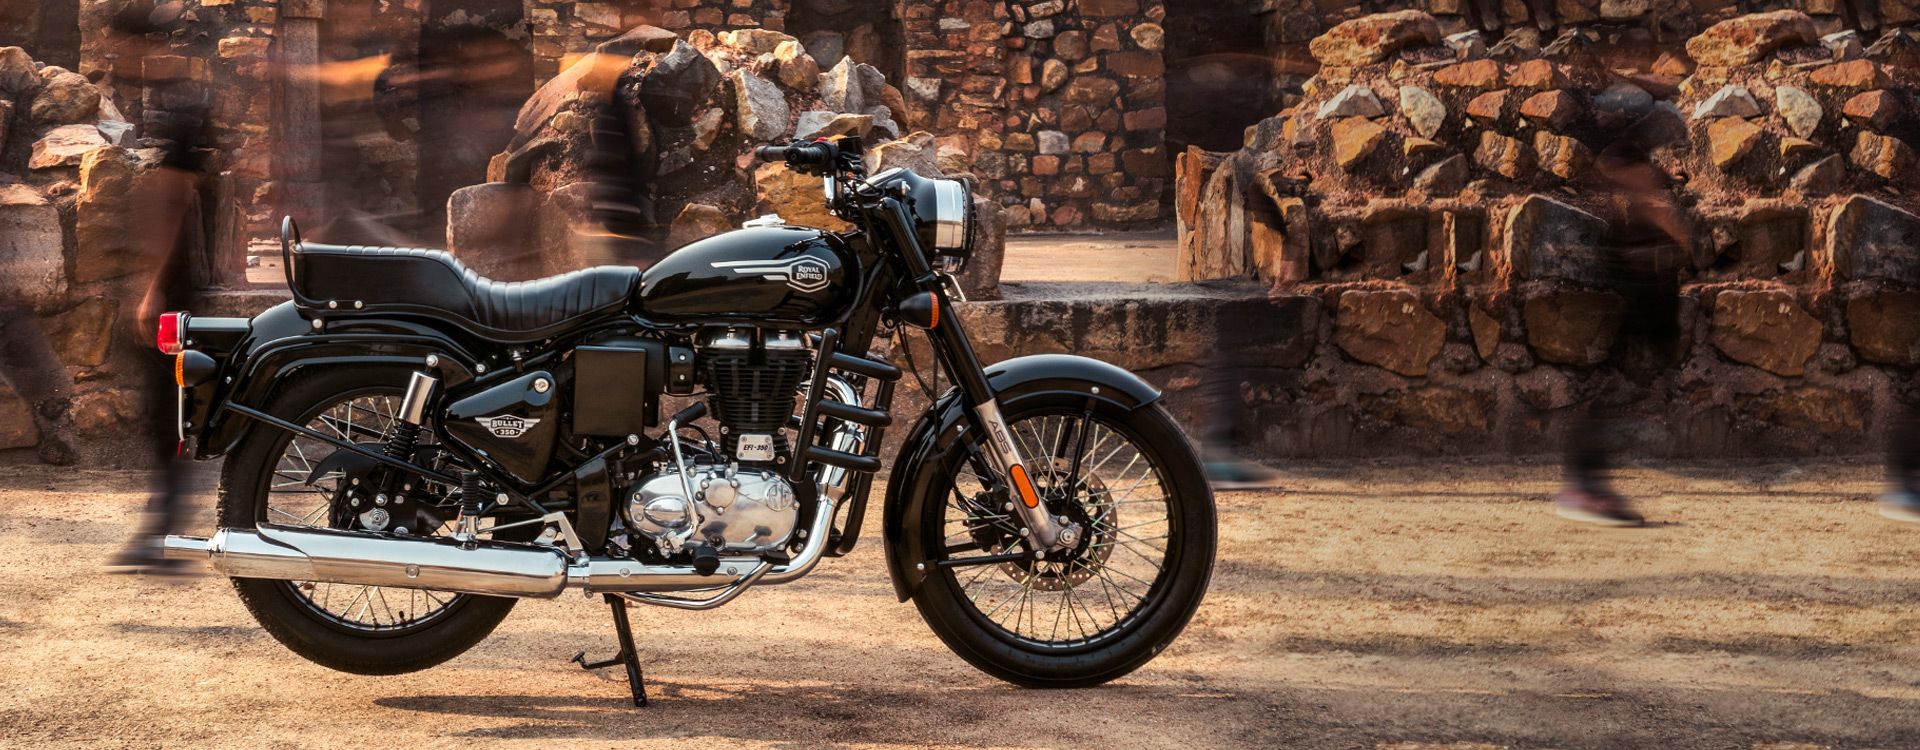 Bullet 350, Specifications, Reviews, Gallery. Royal Enfield